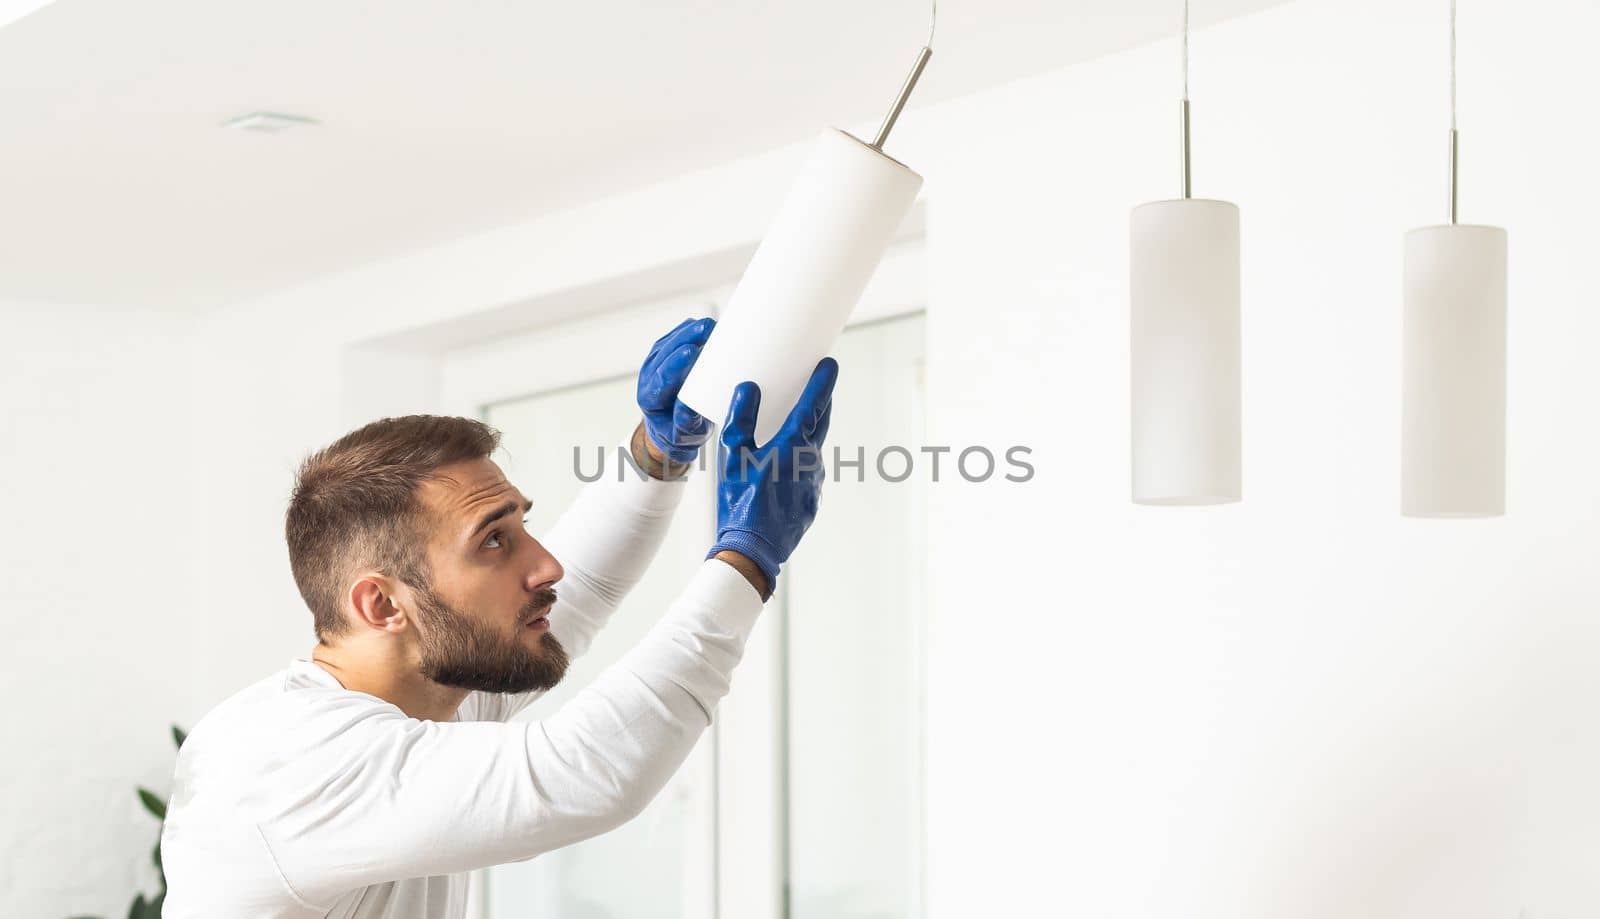 Home Ceiling Light Equipment Maintenance. Professional Electrician Worker